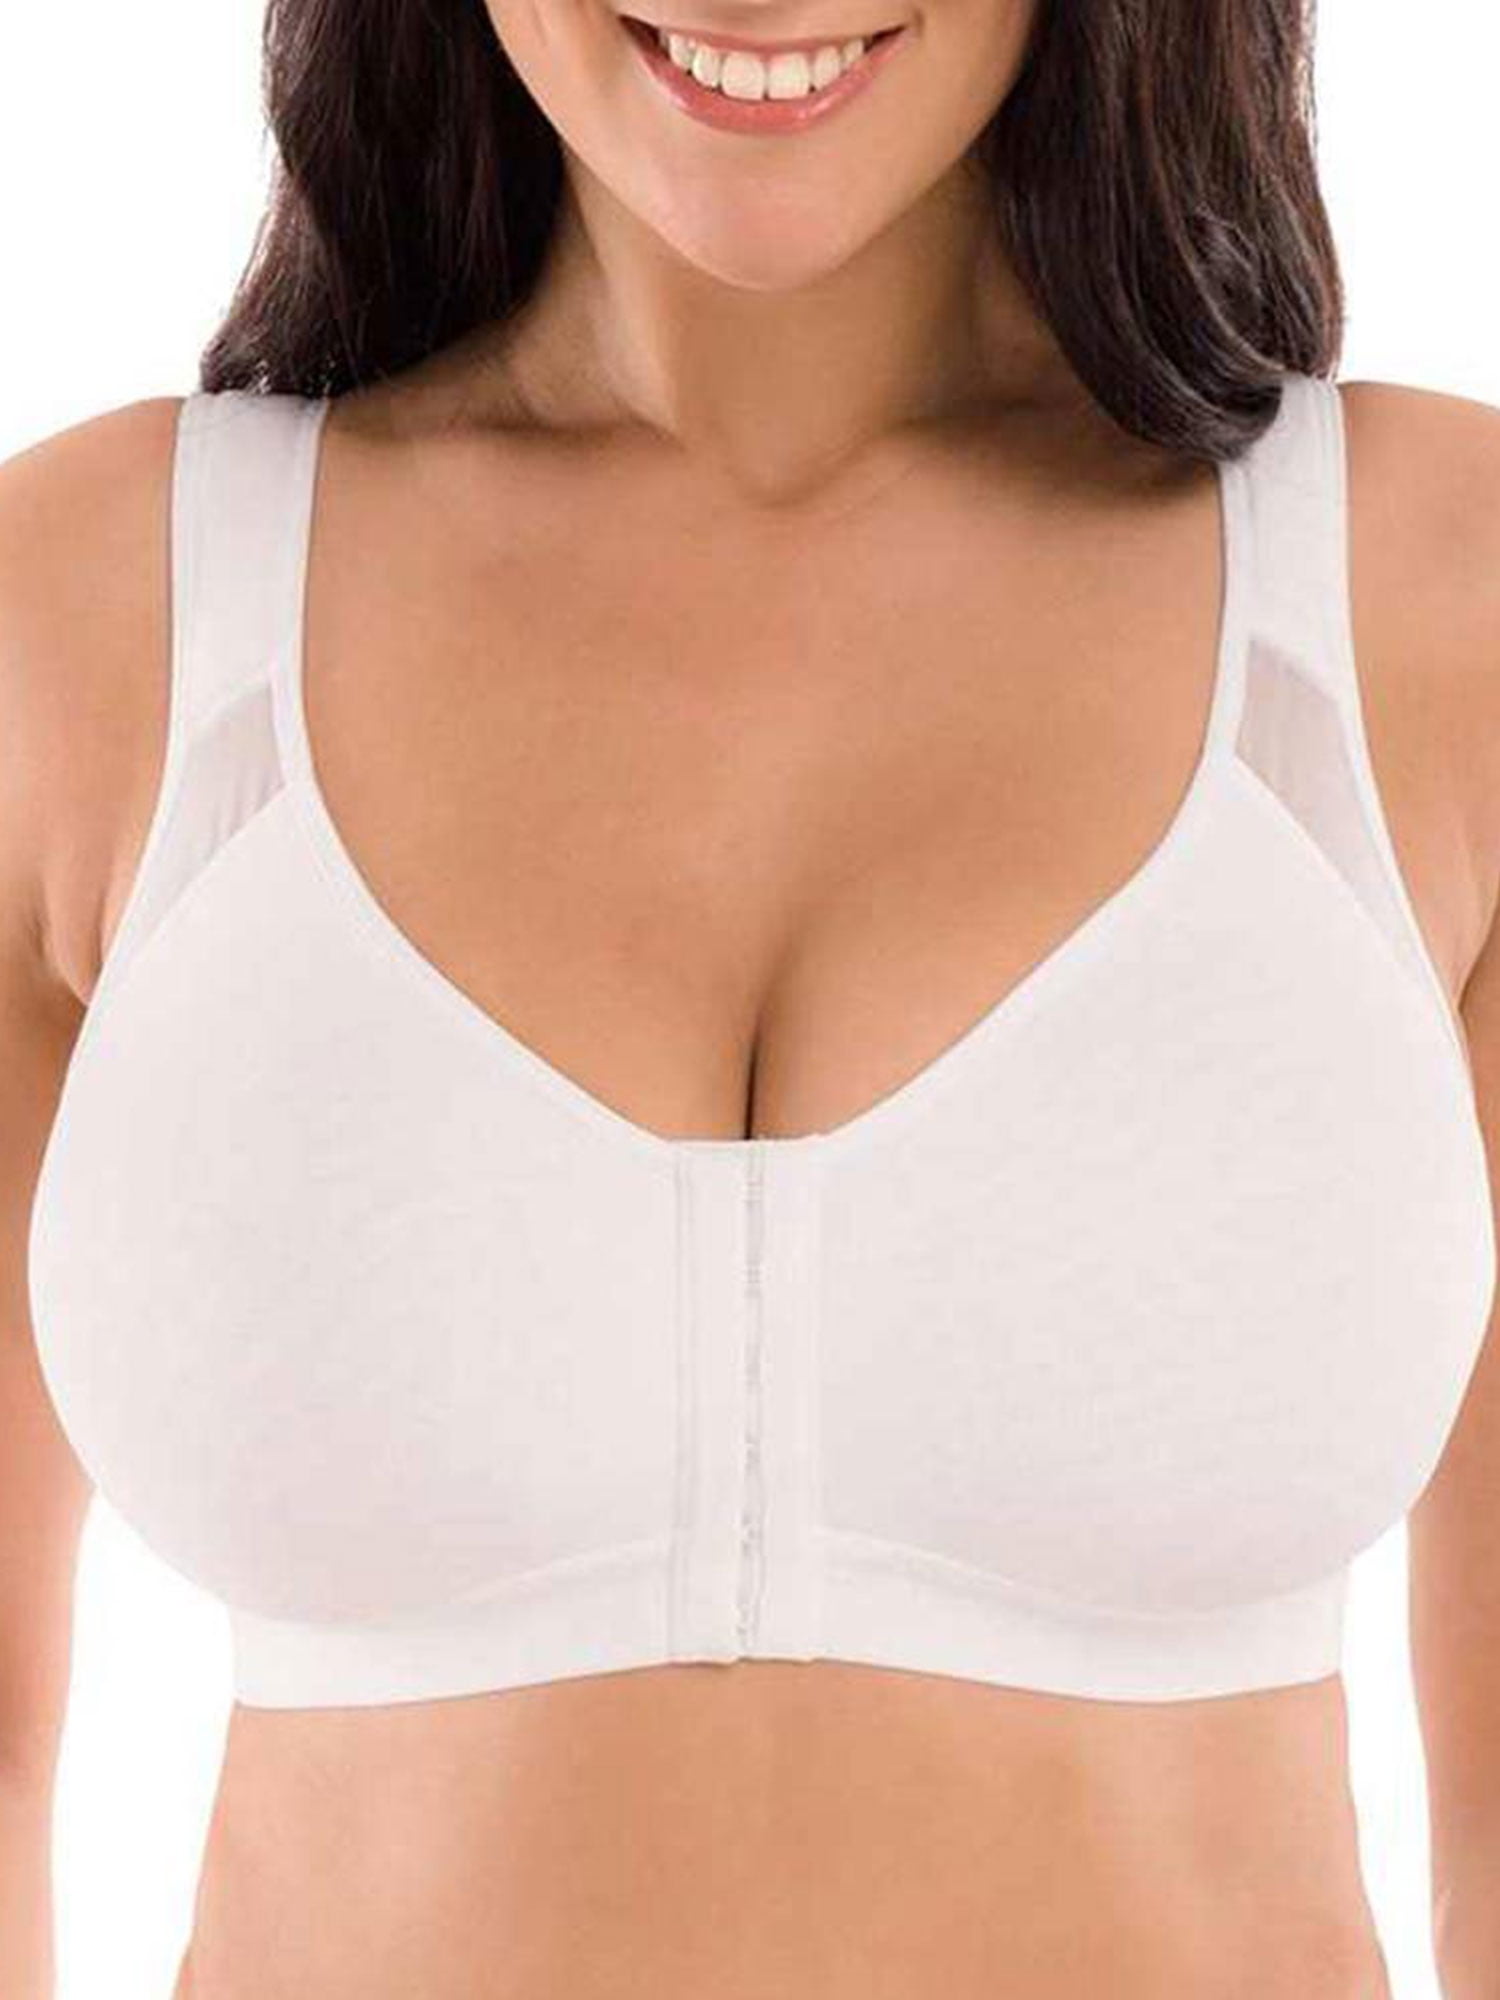 Xmarks Bras for Older Women with Sagging Breasts Back Support Front Closure  - Front Closure Sports Bras Women Cotton Ultra Soft Cup Sleep Bras(3-Packs)  